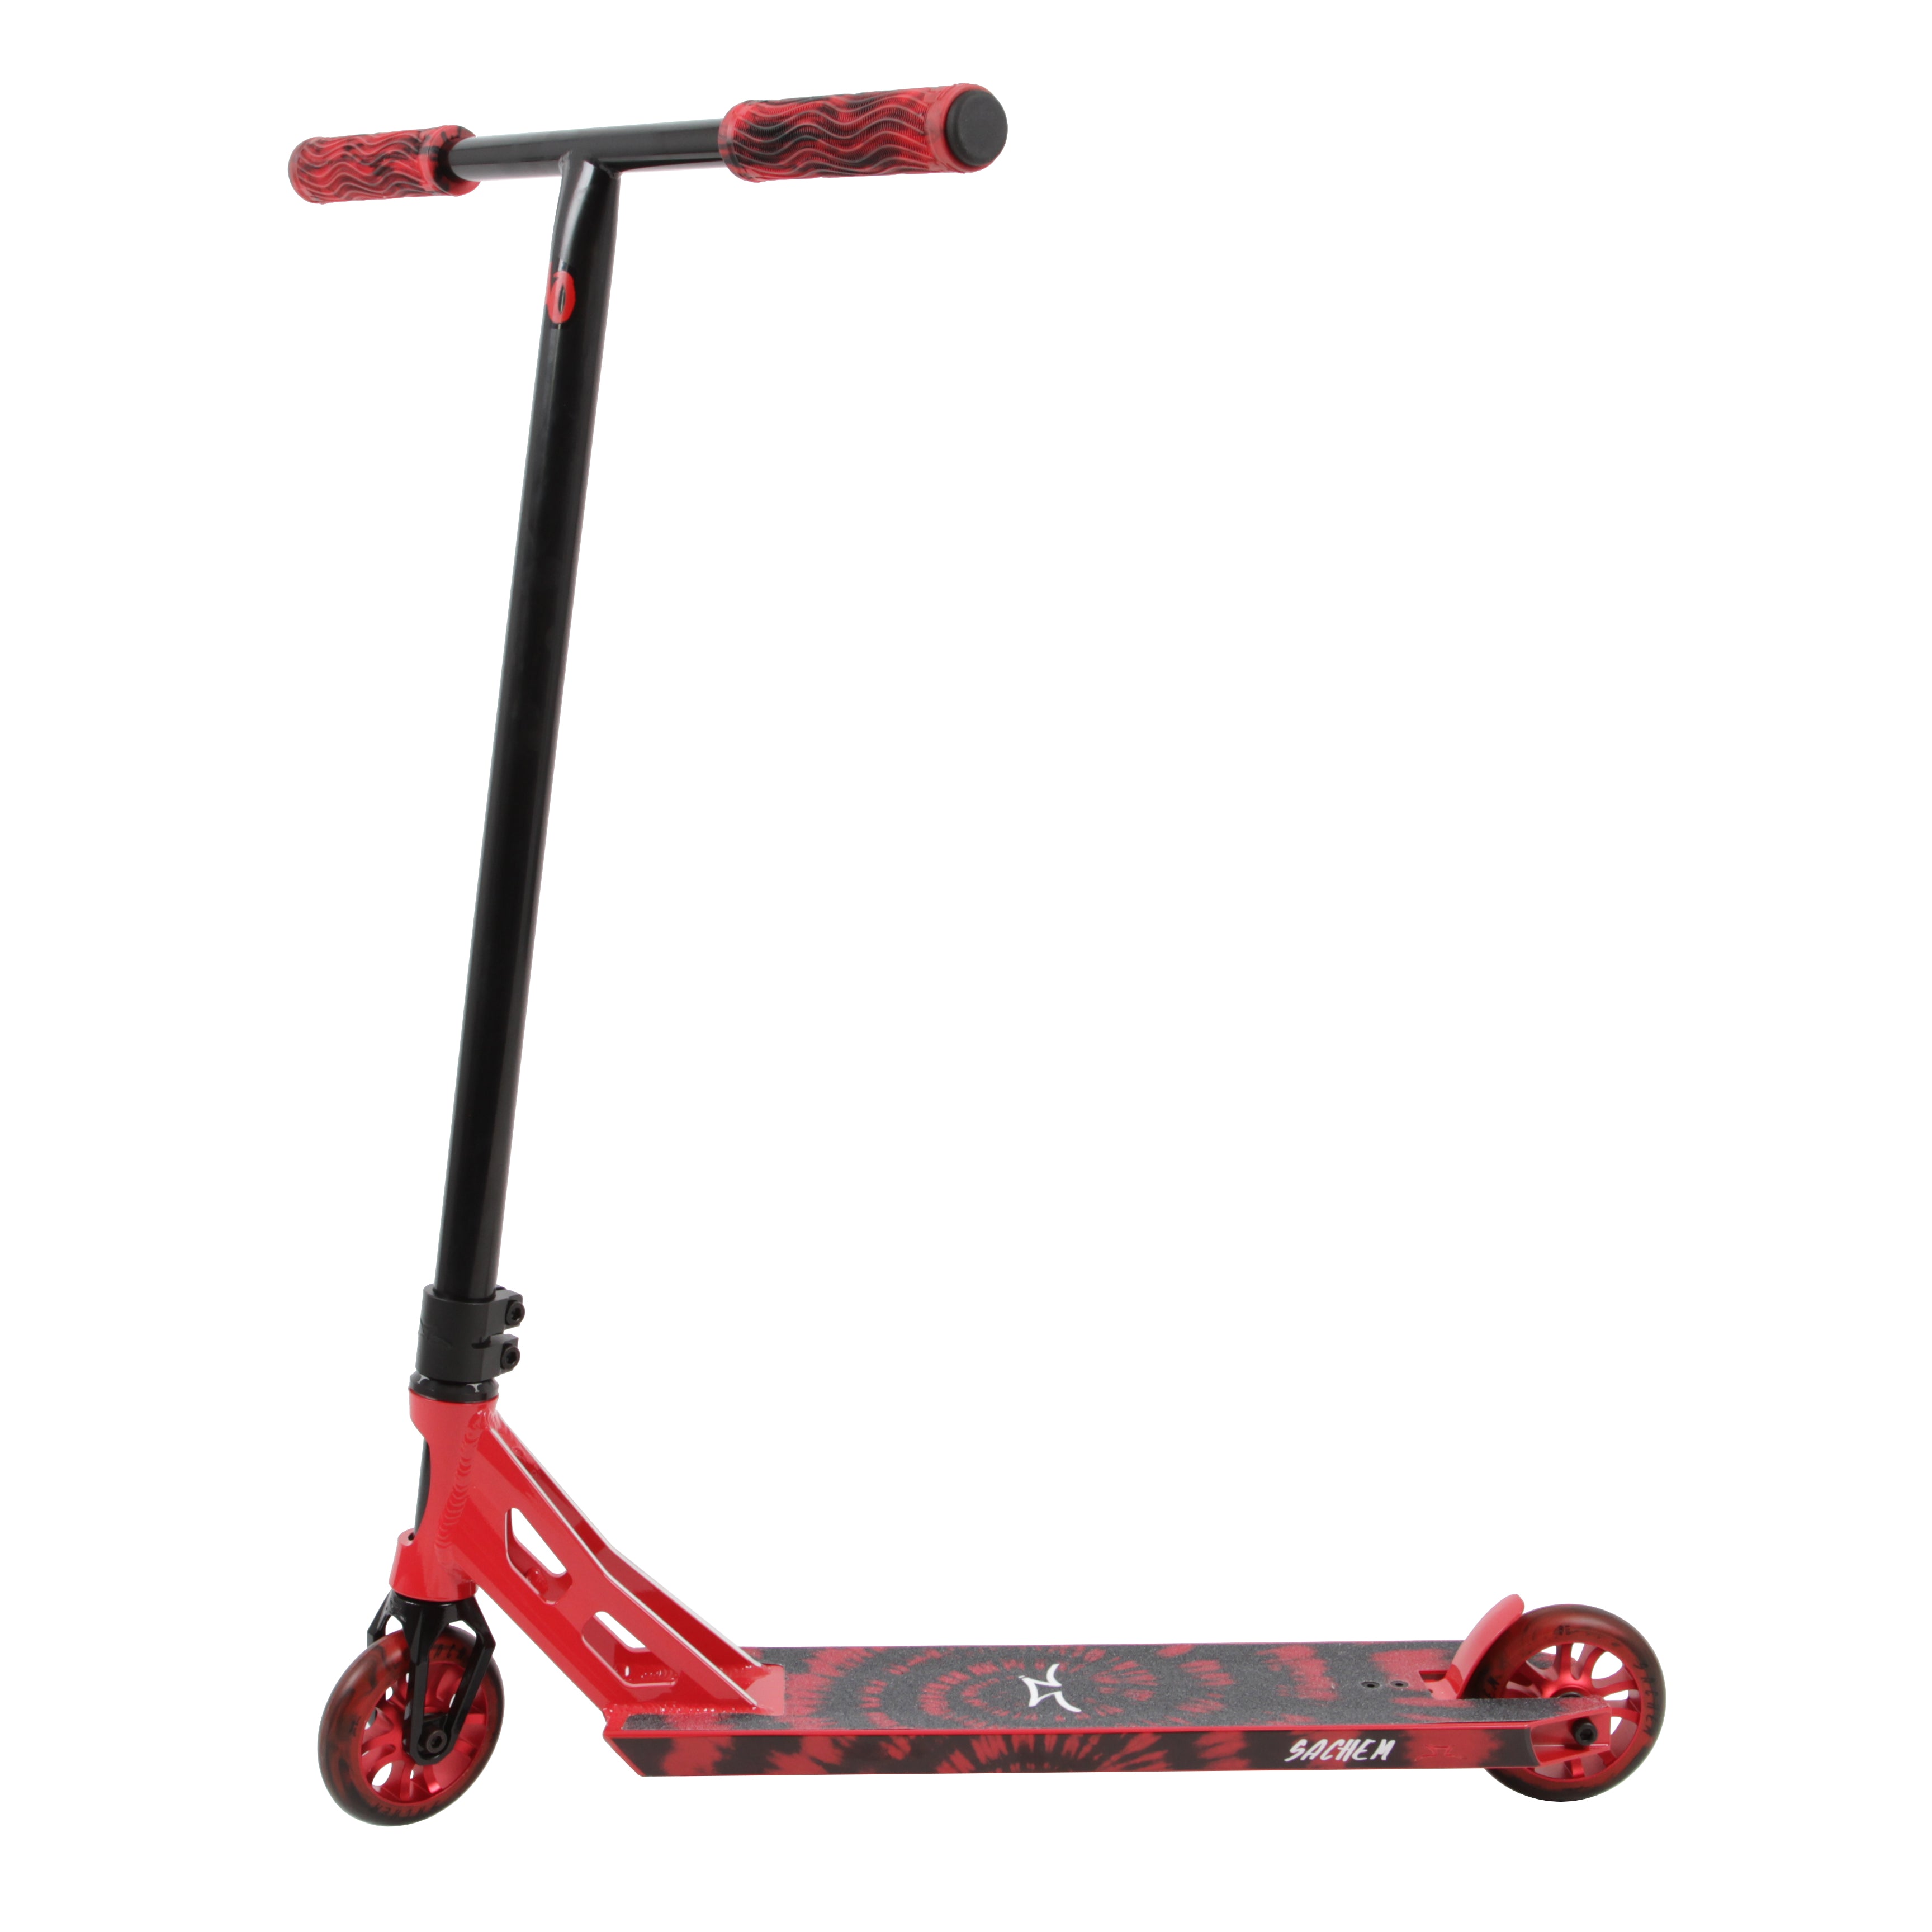 AO Sachem XT - Scooter Complete Red Side View